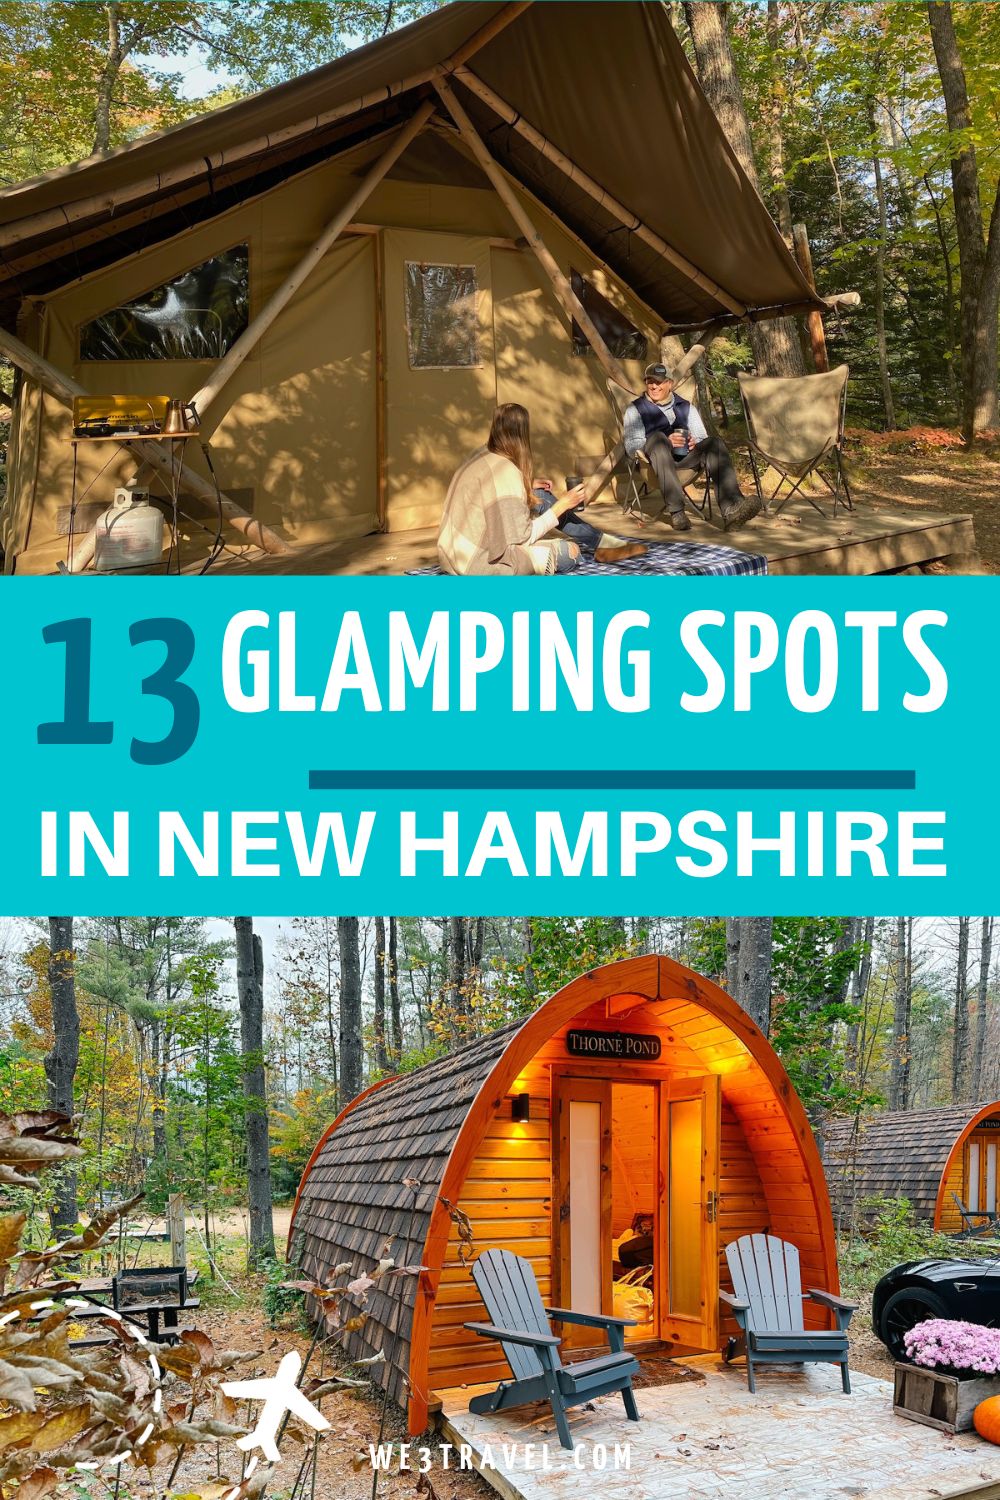 Looking for where to go glamping in New Hampshire? These treehouses, tents, cabins, tiny houses, and yurts make great getaways.